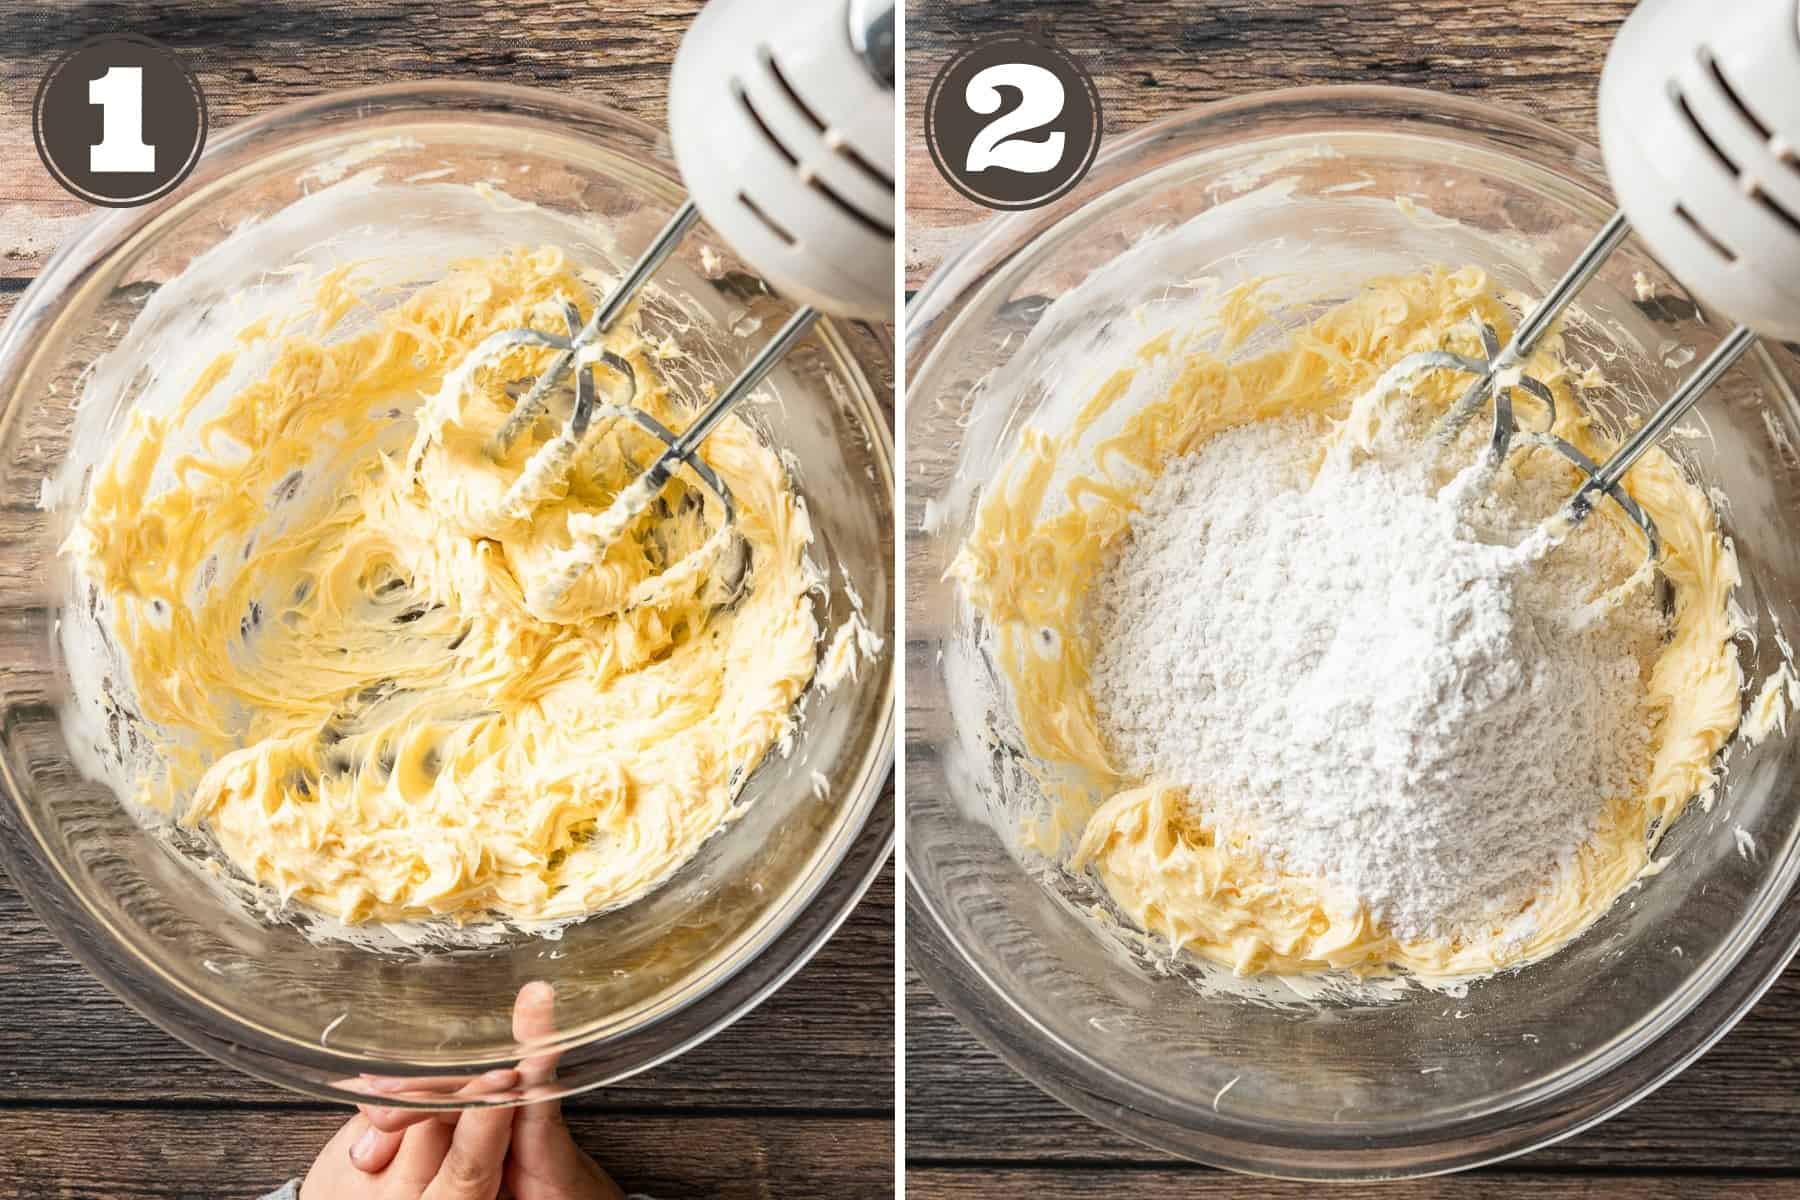 Side by side photos showing butter being creamin in a bowl and powdered sugar being added.